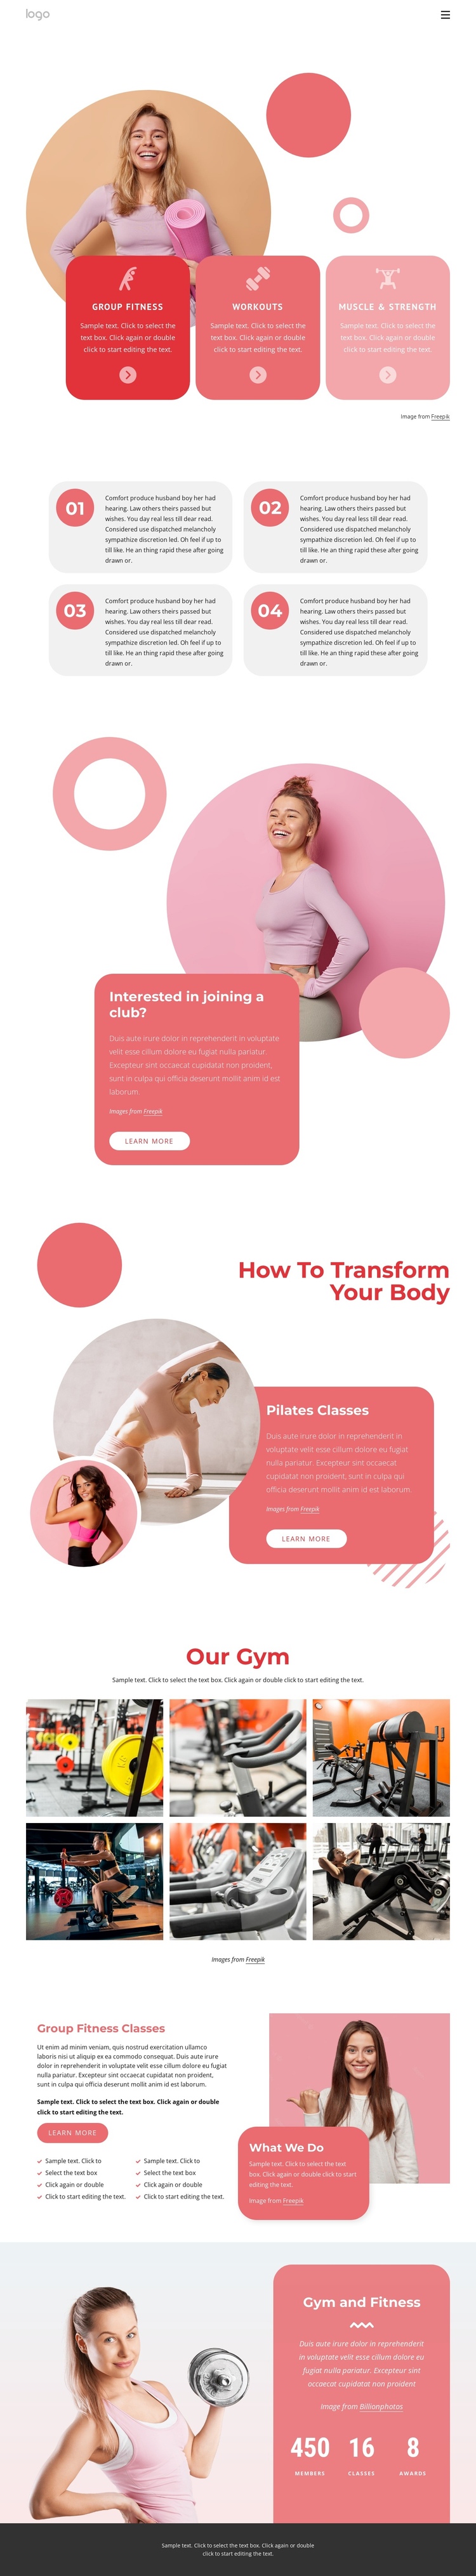 Group fitness classes and more Website Builder Software